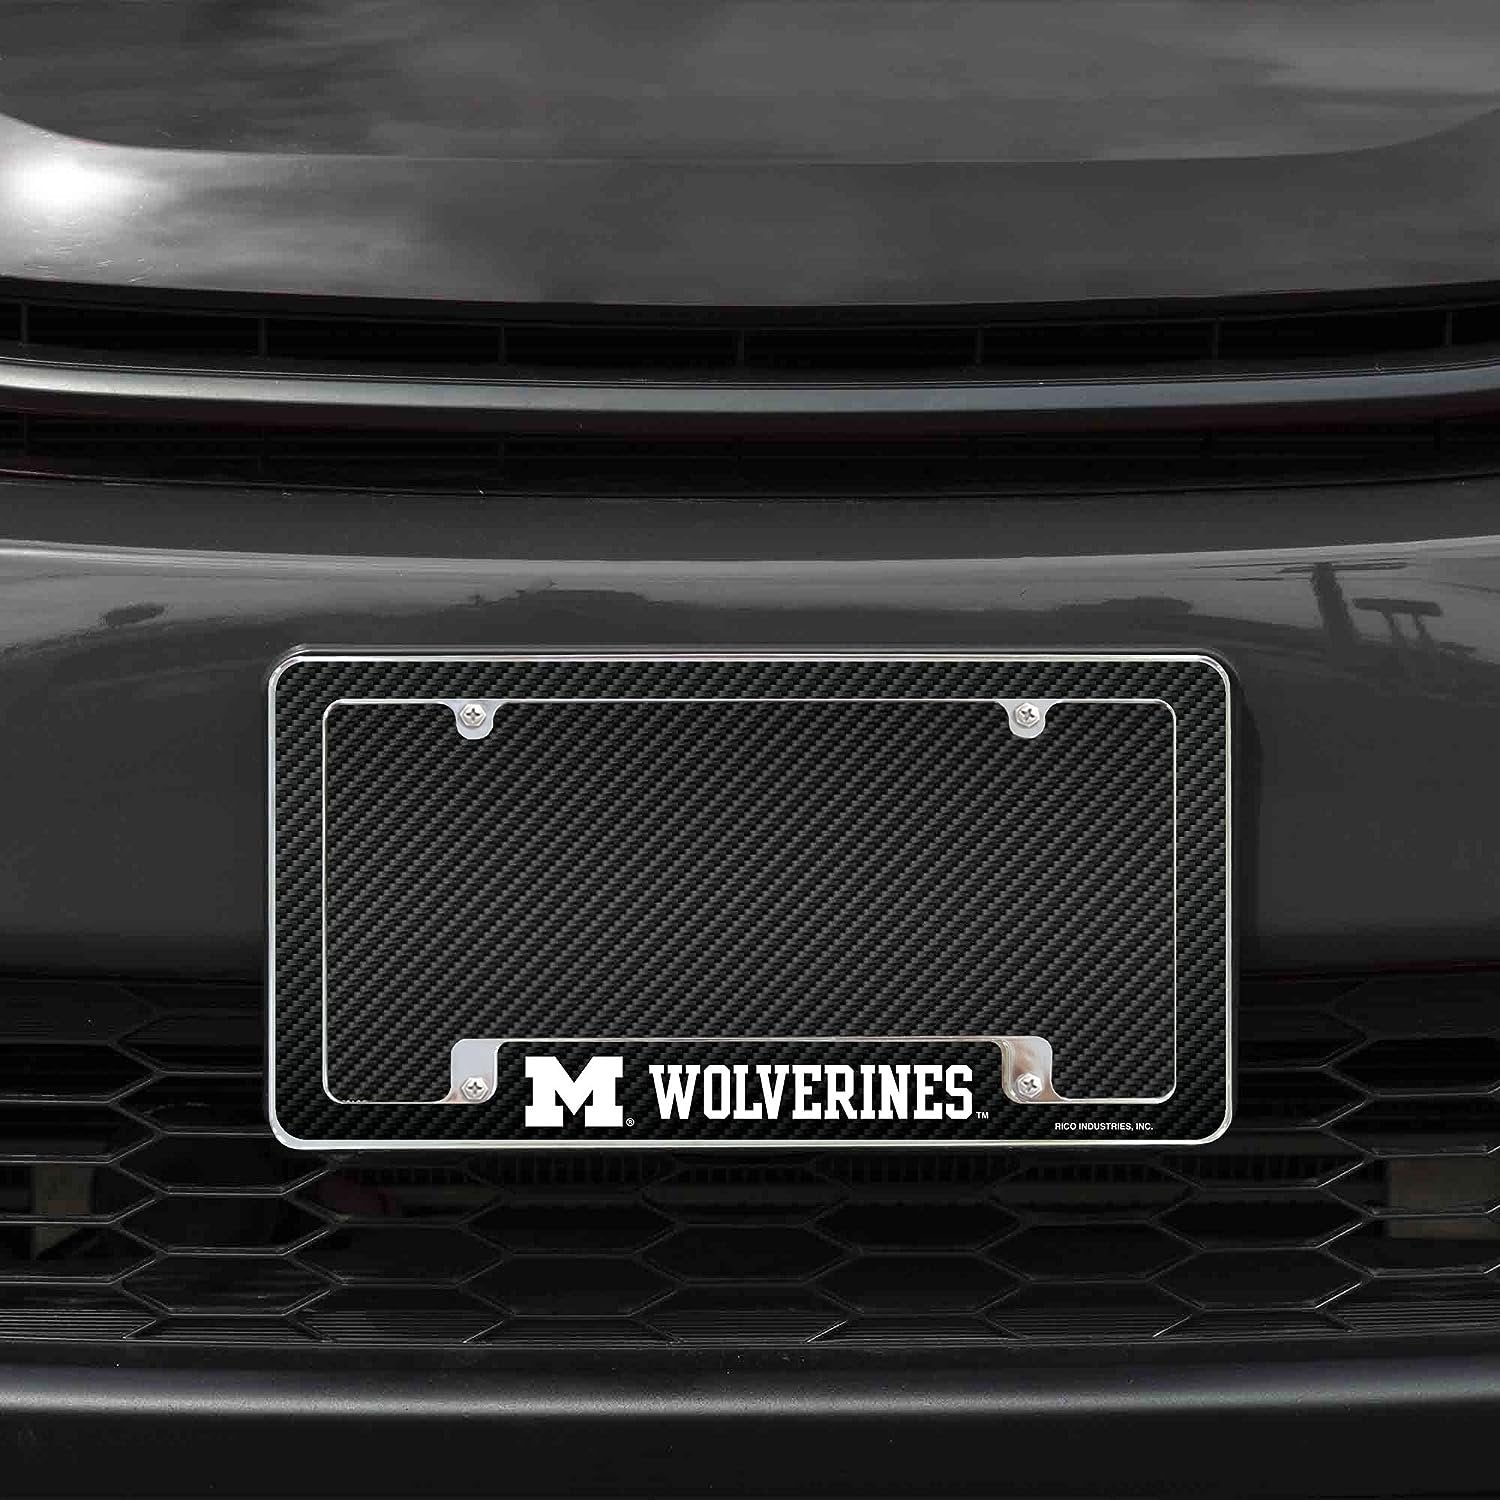 University of Michigan Wolverines Metal License Plate Frame Chrome Tag Cover 12x6 Inch Carbon Fiber Design